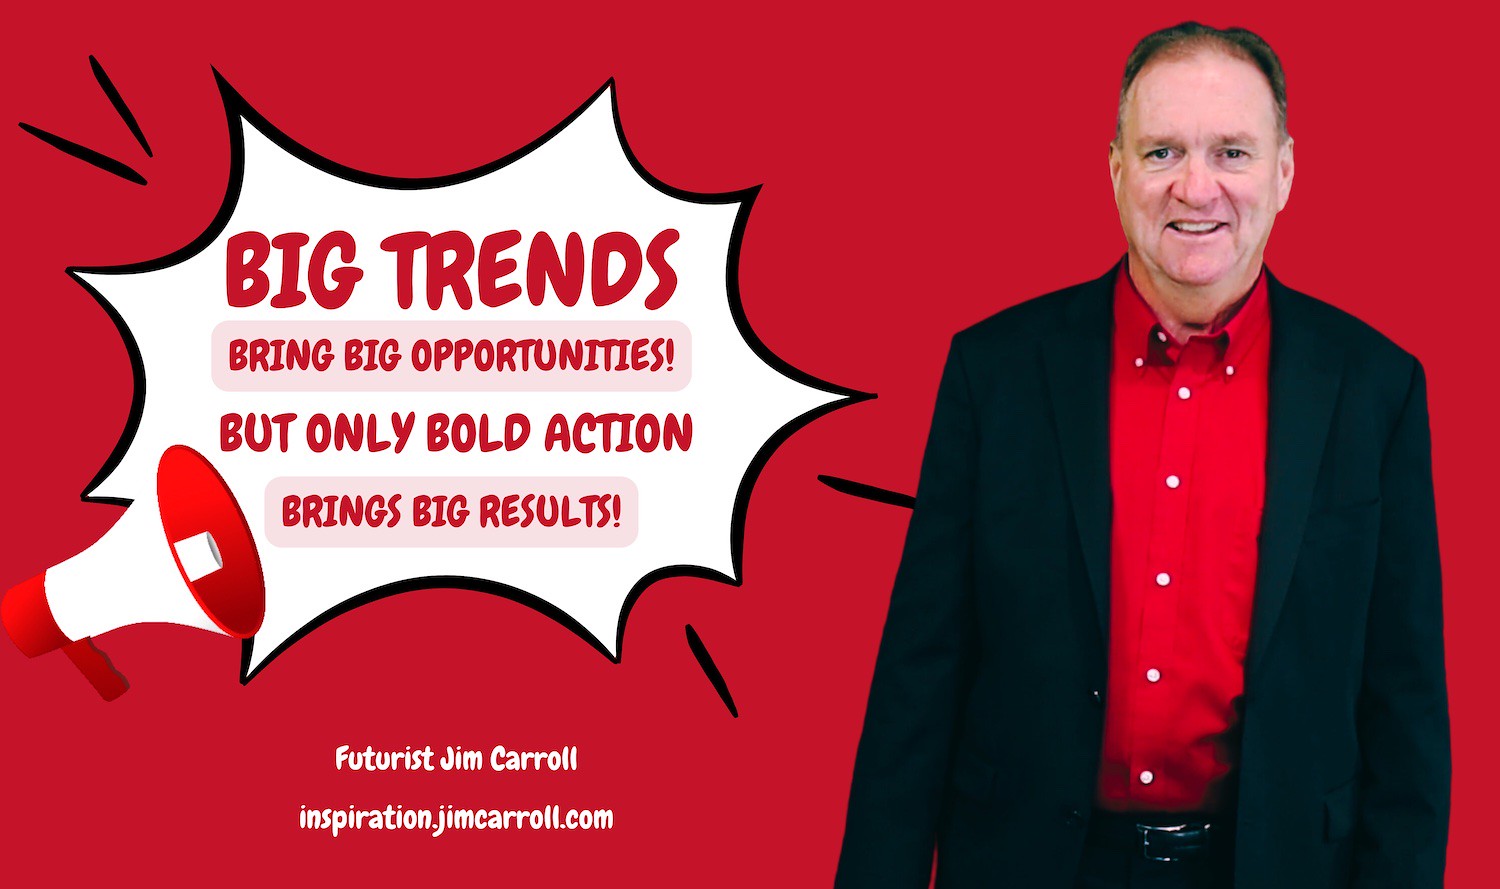 "Big trends bring big opportunities! But only bold action brings big results!" - Futurist Jim Carroll